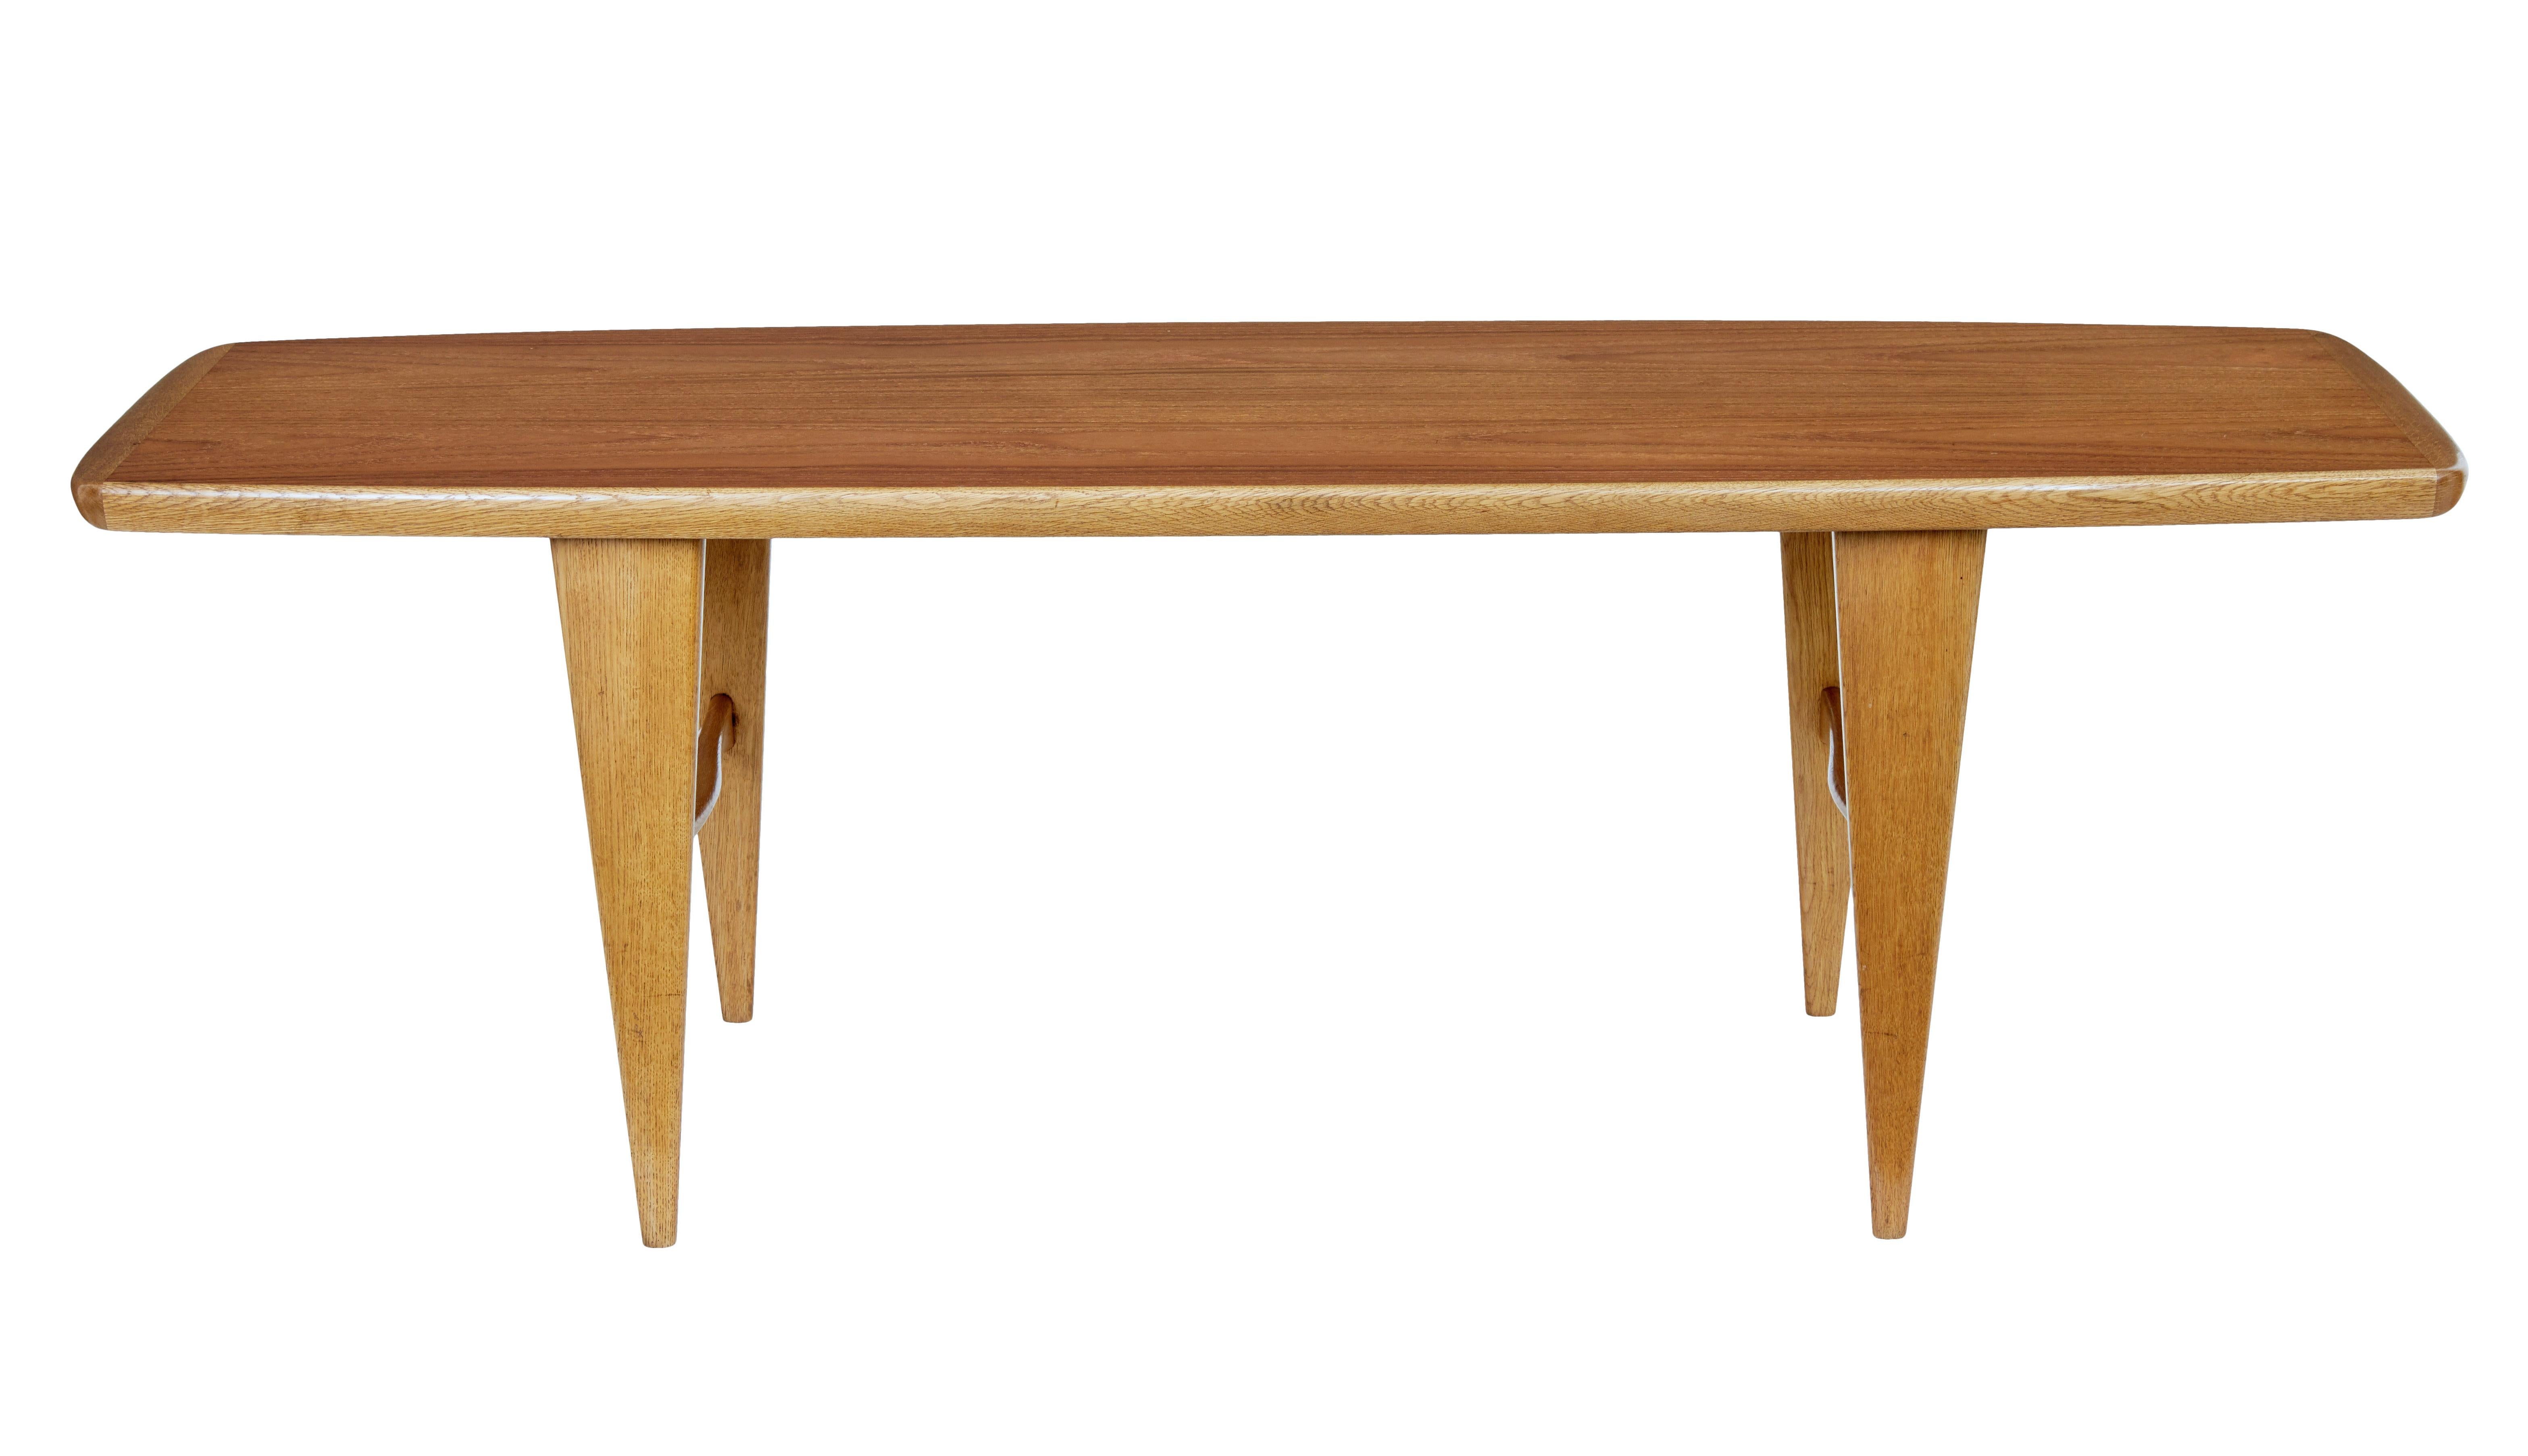 Mid-20th century Scandinavian teak coffee table, circa 1960.

Stylish teak and oak shaped coffee table. Teak top with oak border. Standing on tapered oak legs united by a shaped h frame stretcher.

Minor surface fading to top. Recently